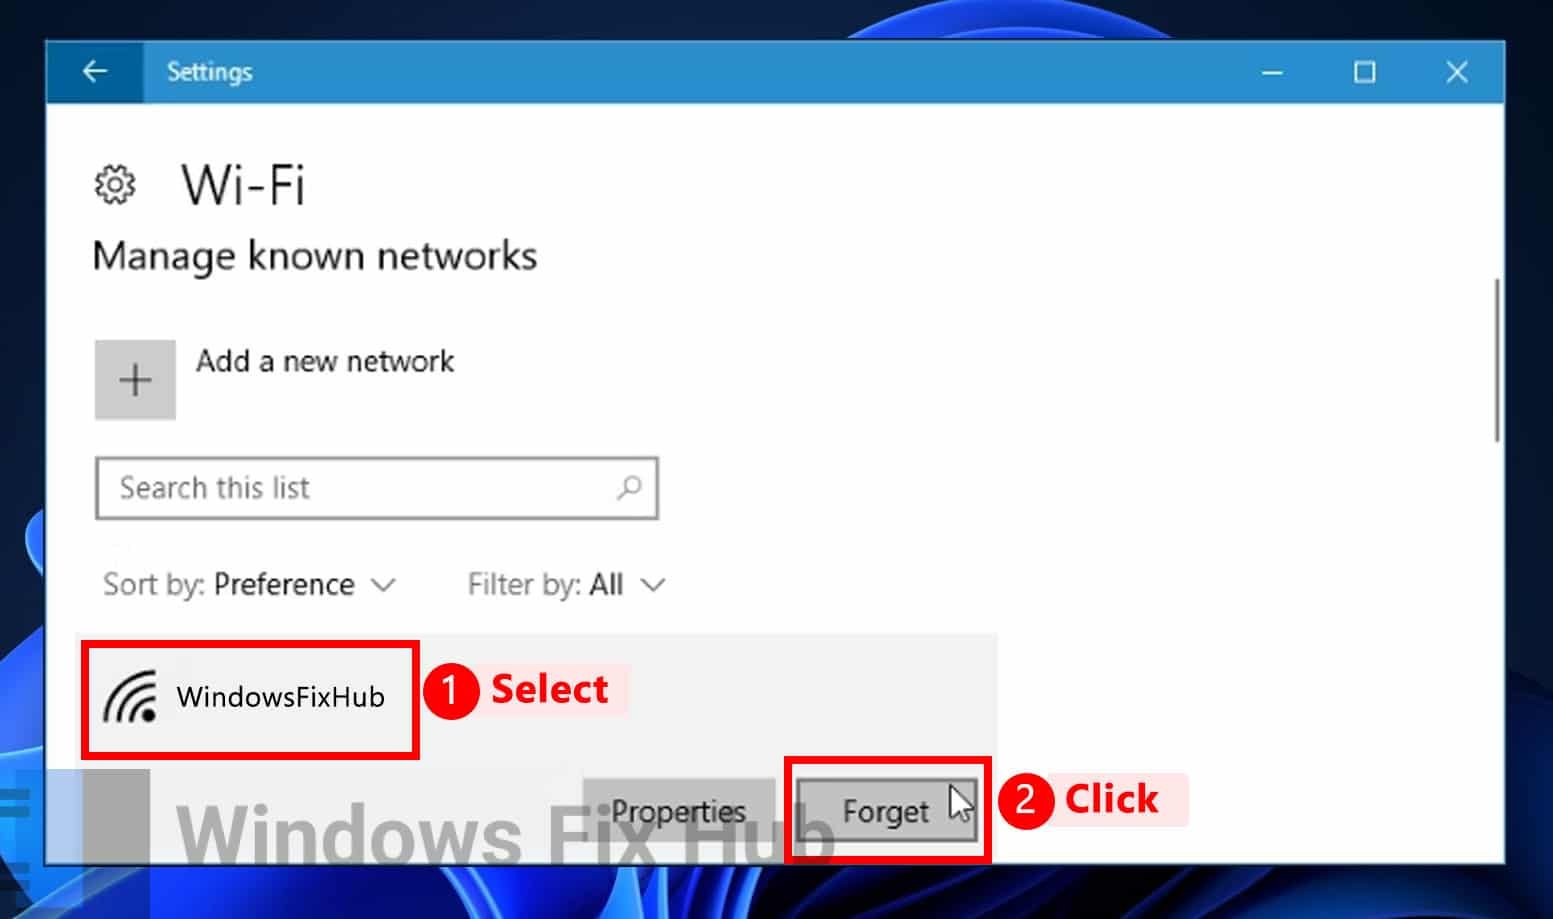 Find network and select 'Forget'